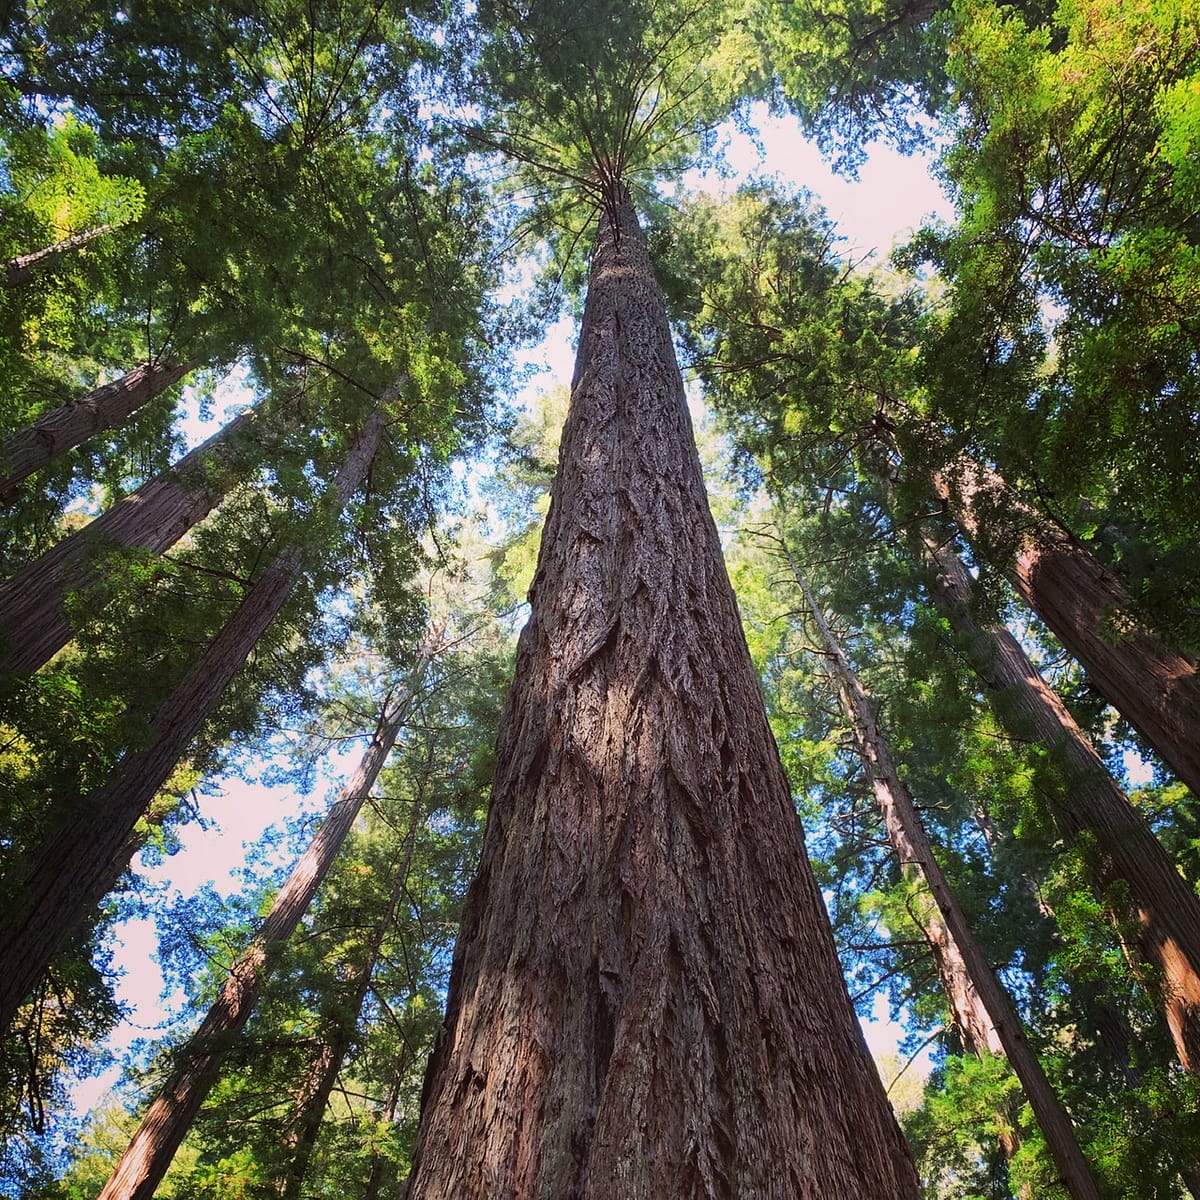 Looking up towards the redwood canopy in Stout Grove